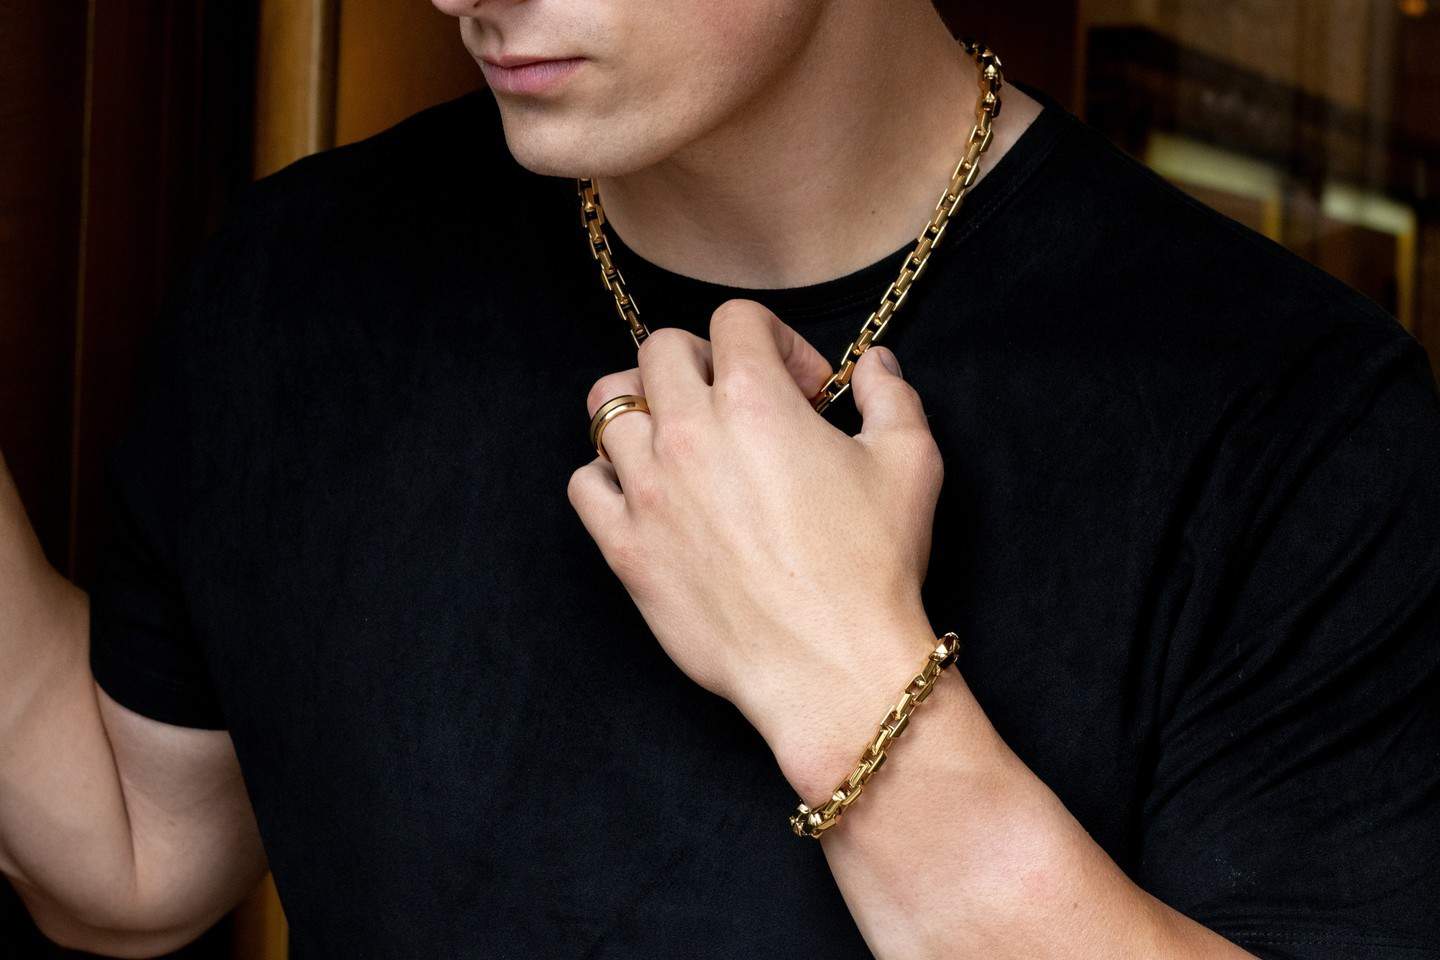 man in a black t-shirt grabbing a chain necklace